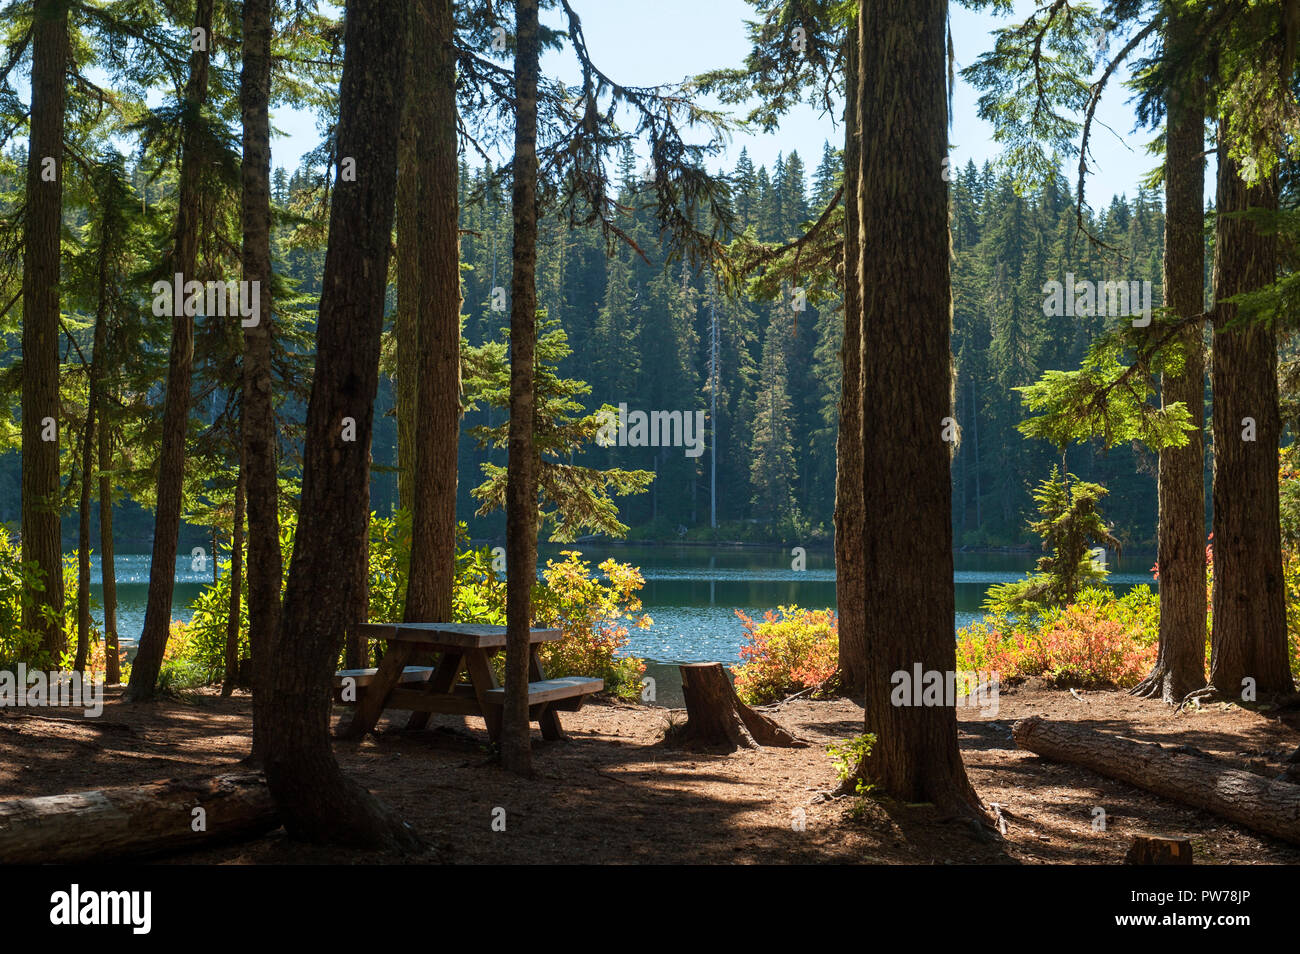 One of the camp sites at Hideaway Lake, in Oregon's Mt. Hood National Forest. Stock Photo